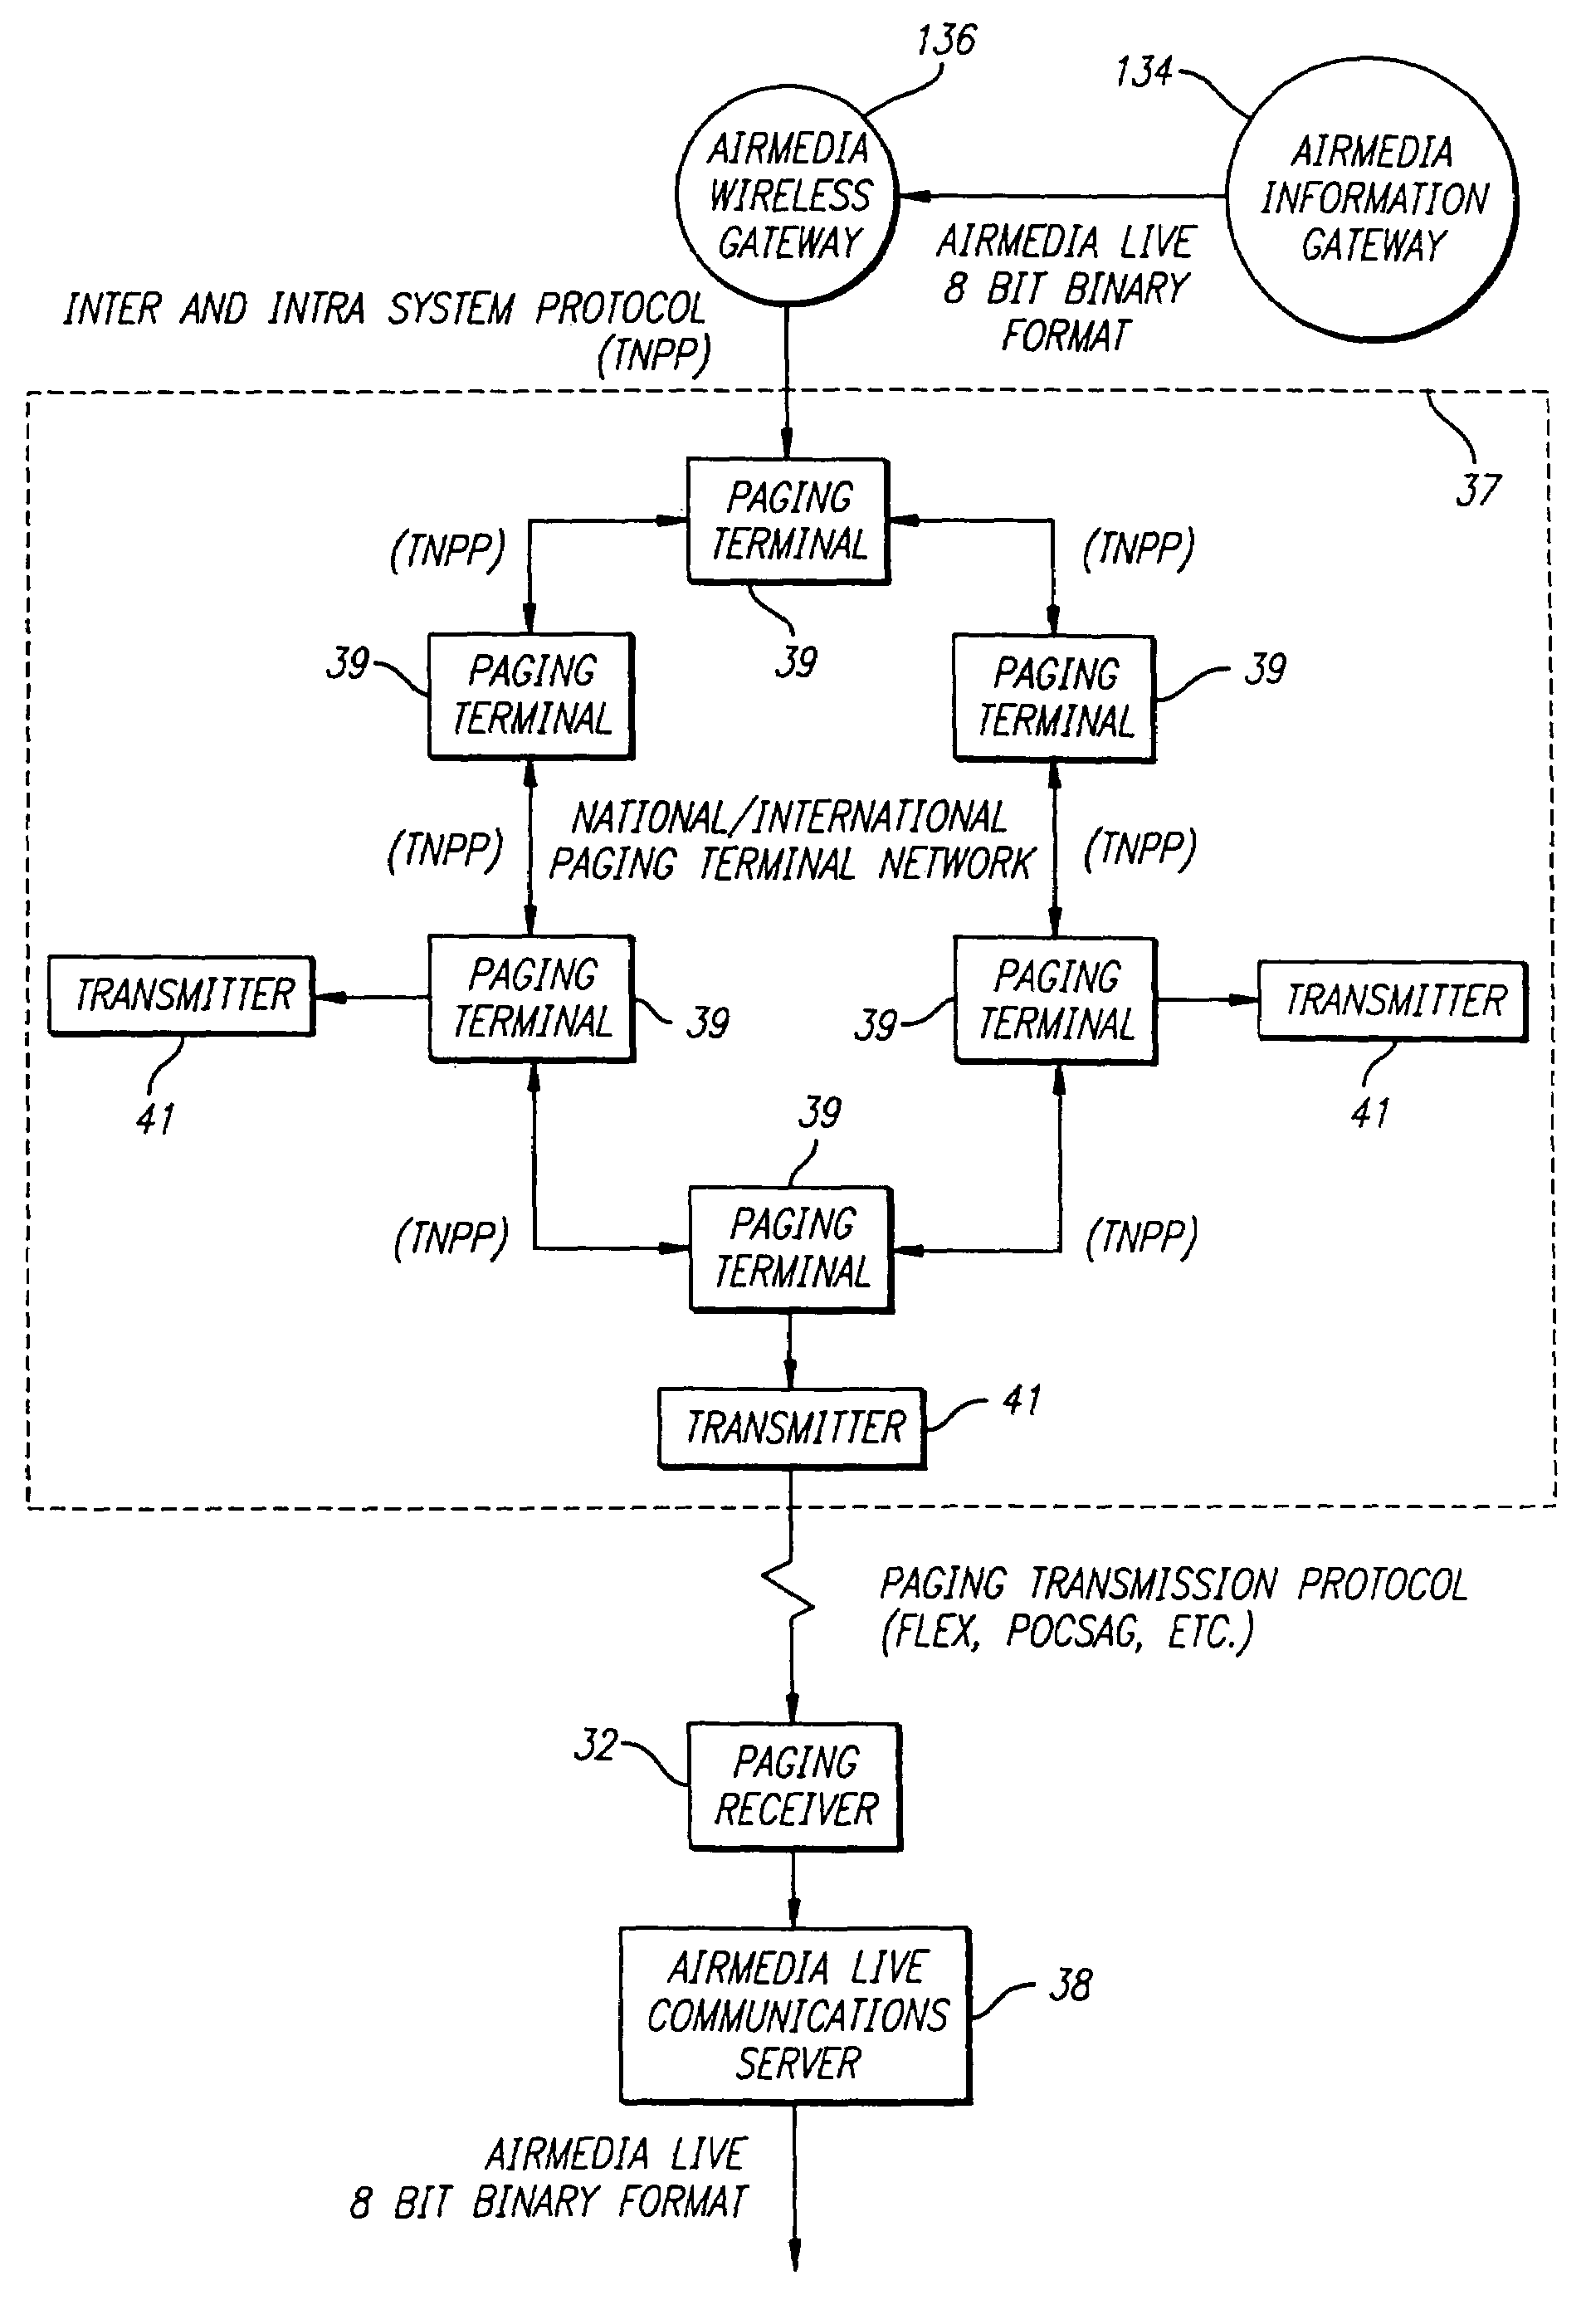 System and method for transmission of data